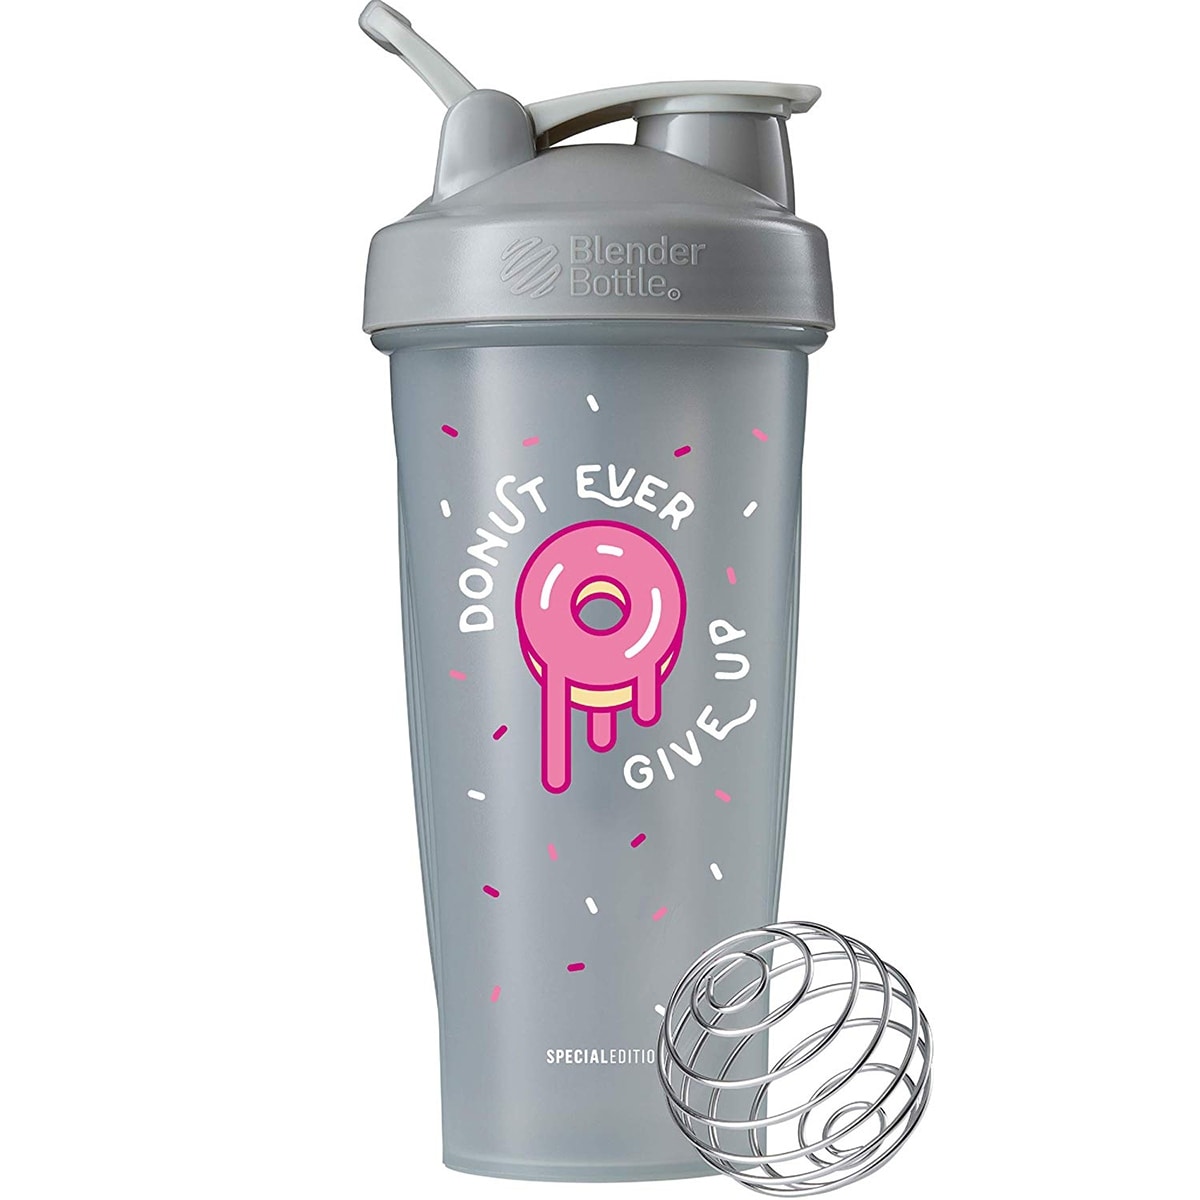 https://ak1.ostkcdn.com/images/products/is/images/direct/d9fcaa80a7f97a5695c82ee1d9cefef9a8d91775/Blender-Bottle-Special-Edition-28-oz.-Shaker-with-Loop-Top---Donut-Ever-Give-Up.jpg